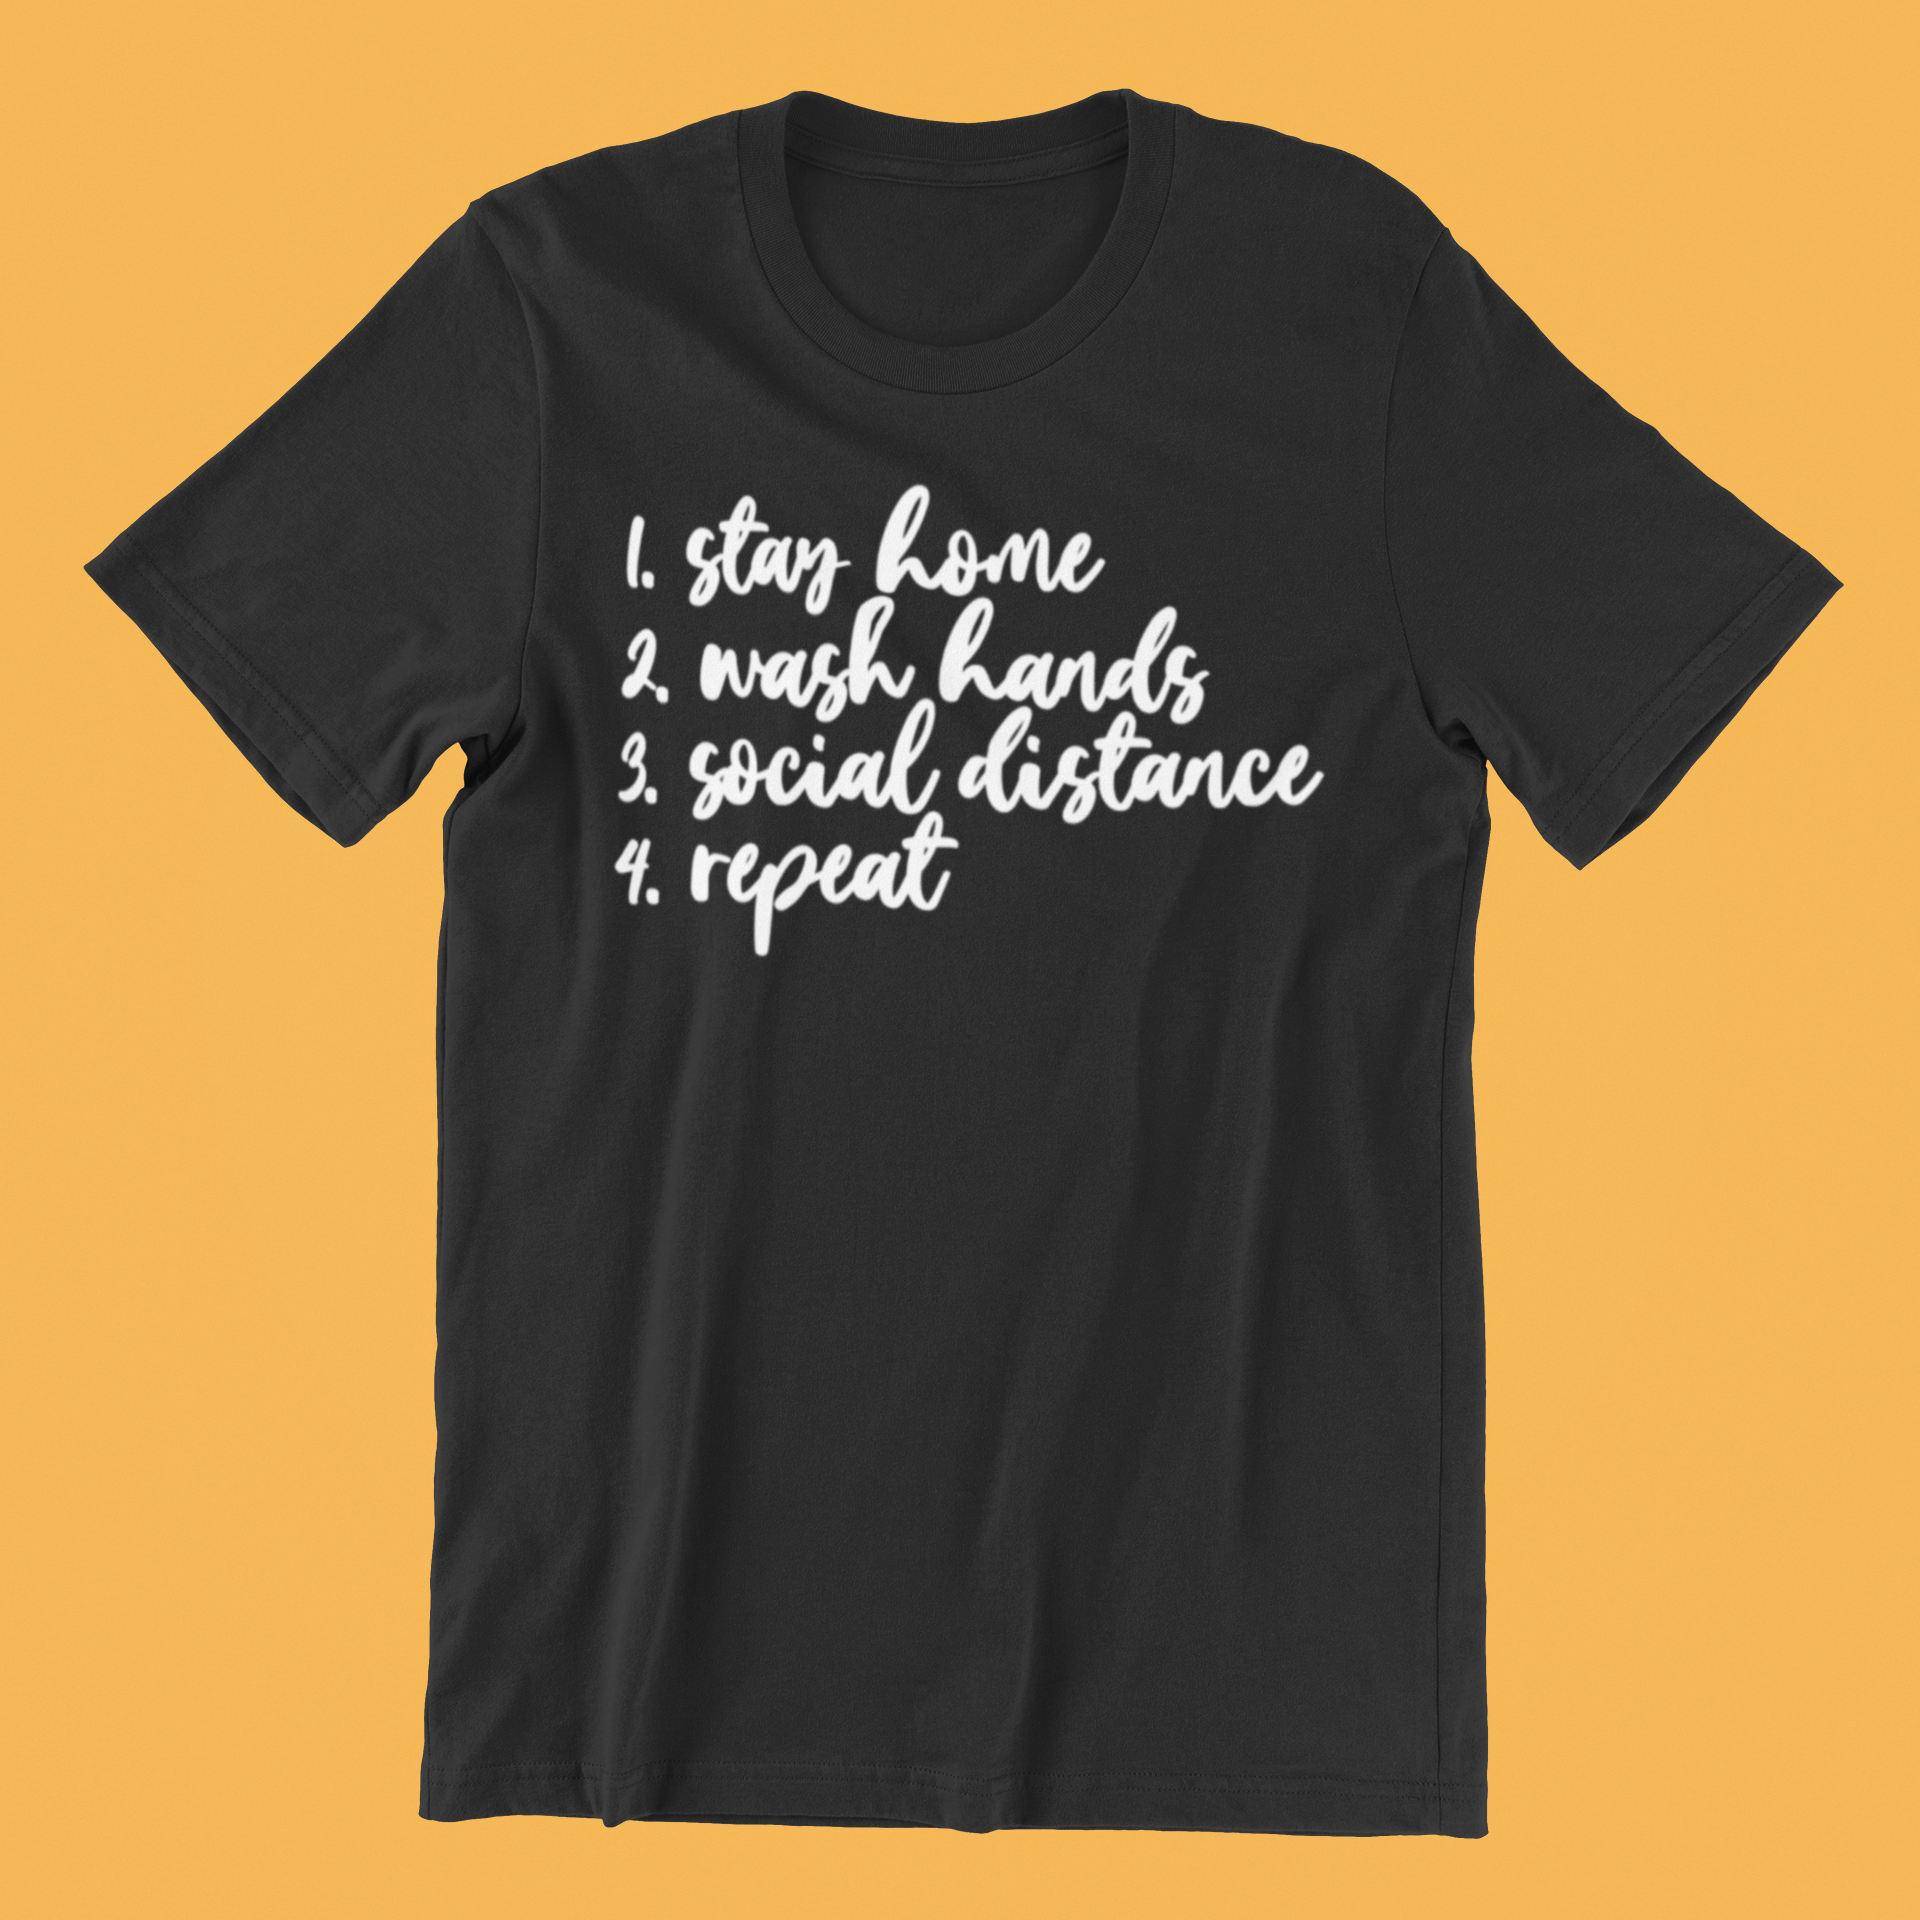 Stay Home - T shirt